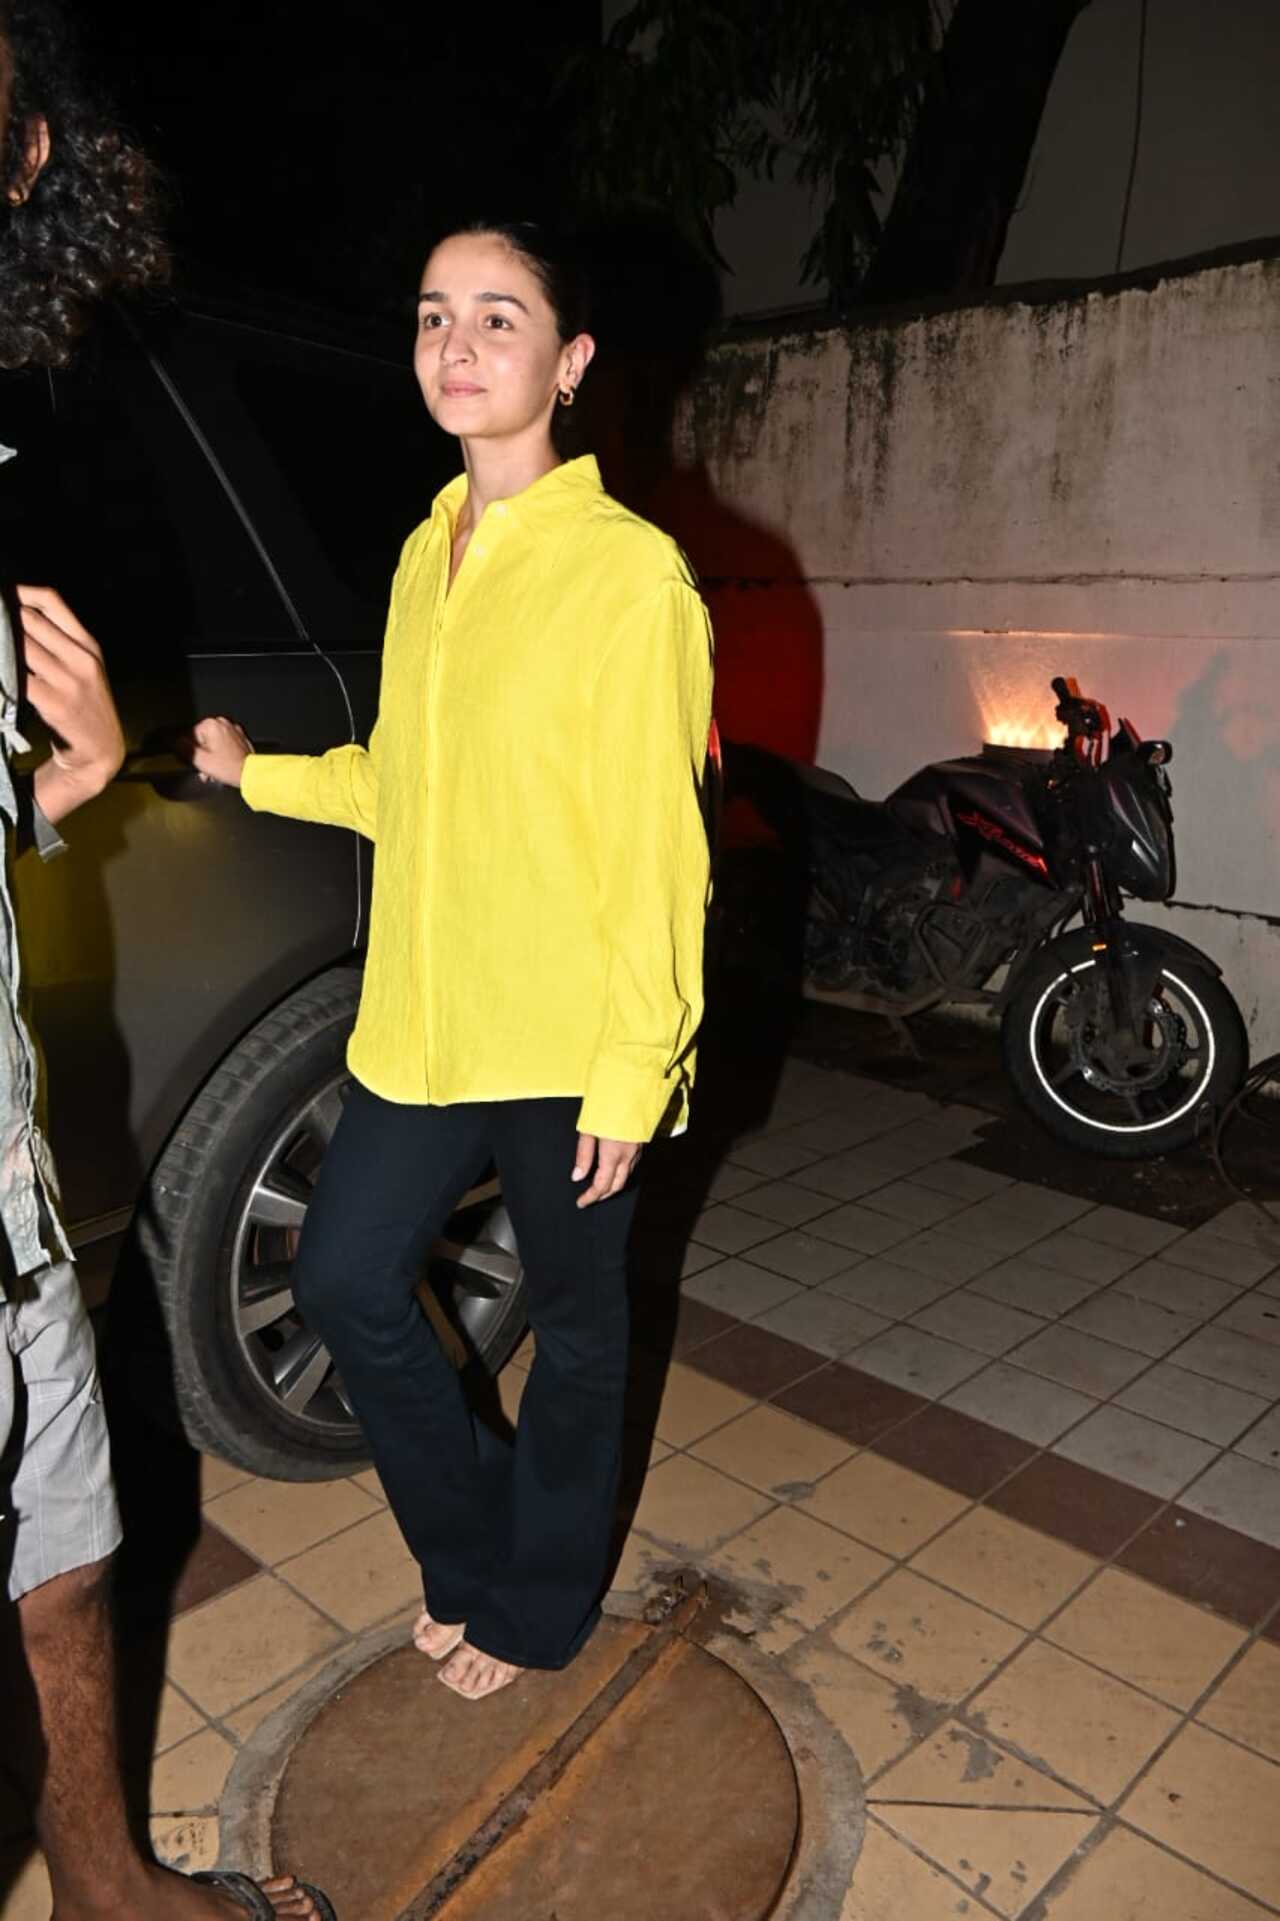 Alia Bhatt looked cool as she was clicked wearing a yellow shirt paired with black bottoms